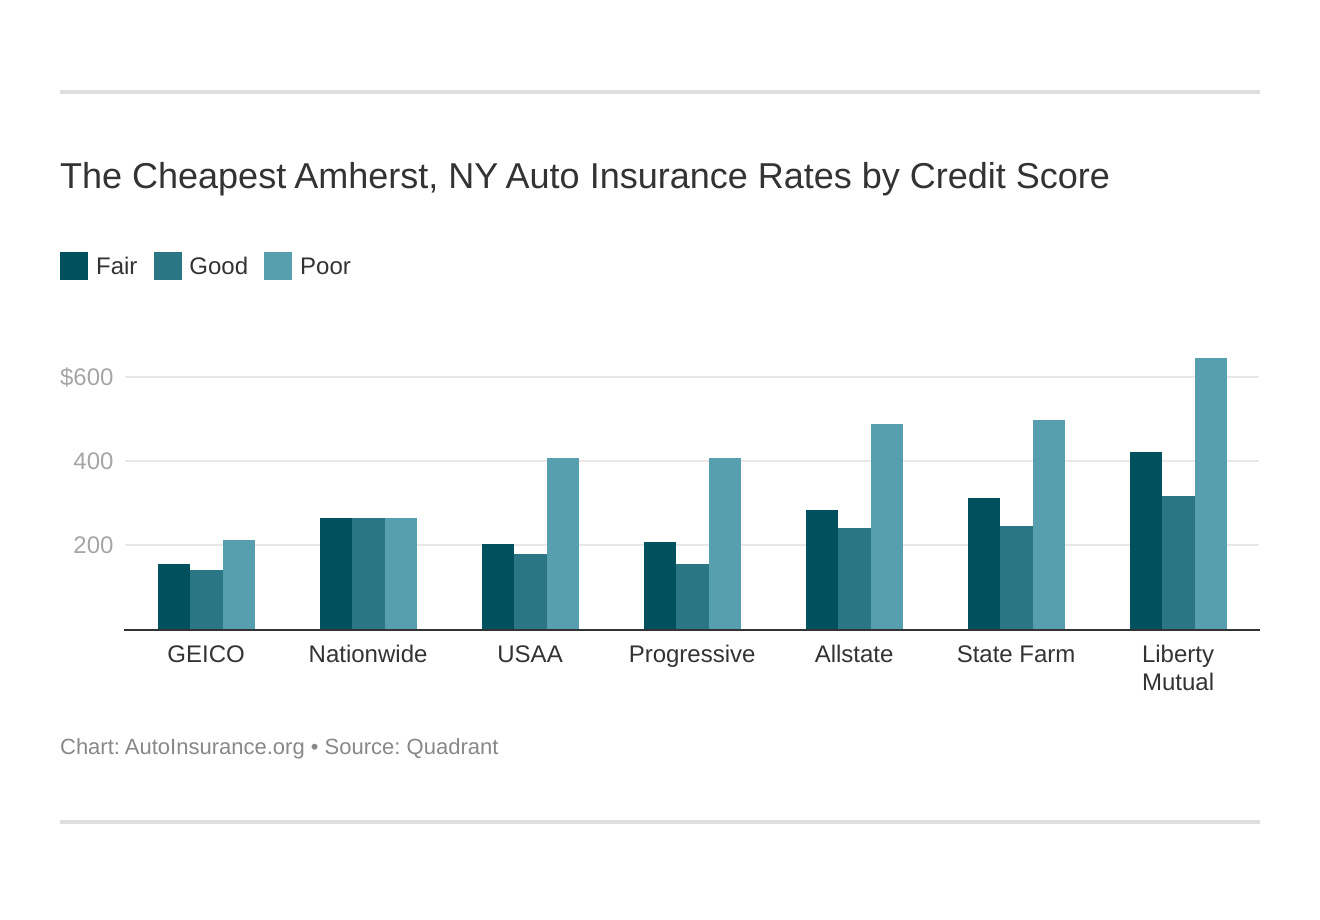 The Cheapest Amherst, NY Auto Insurance Rates by Credit Score